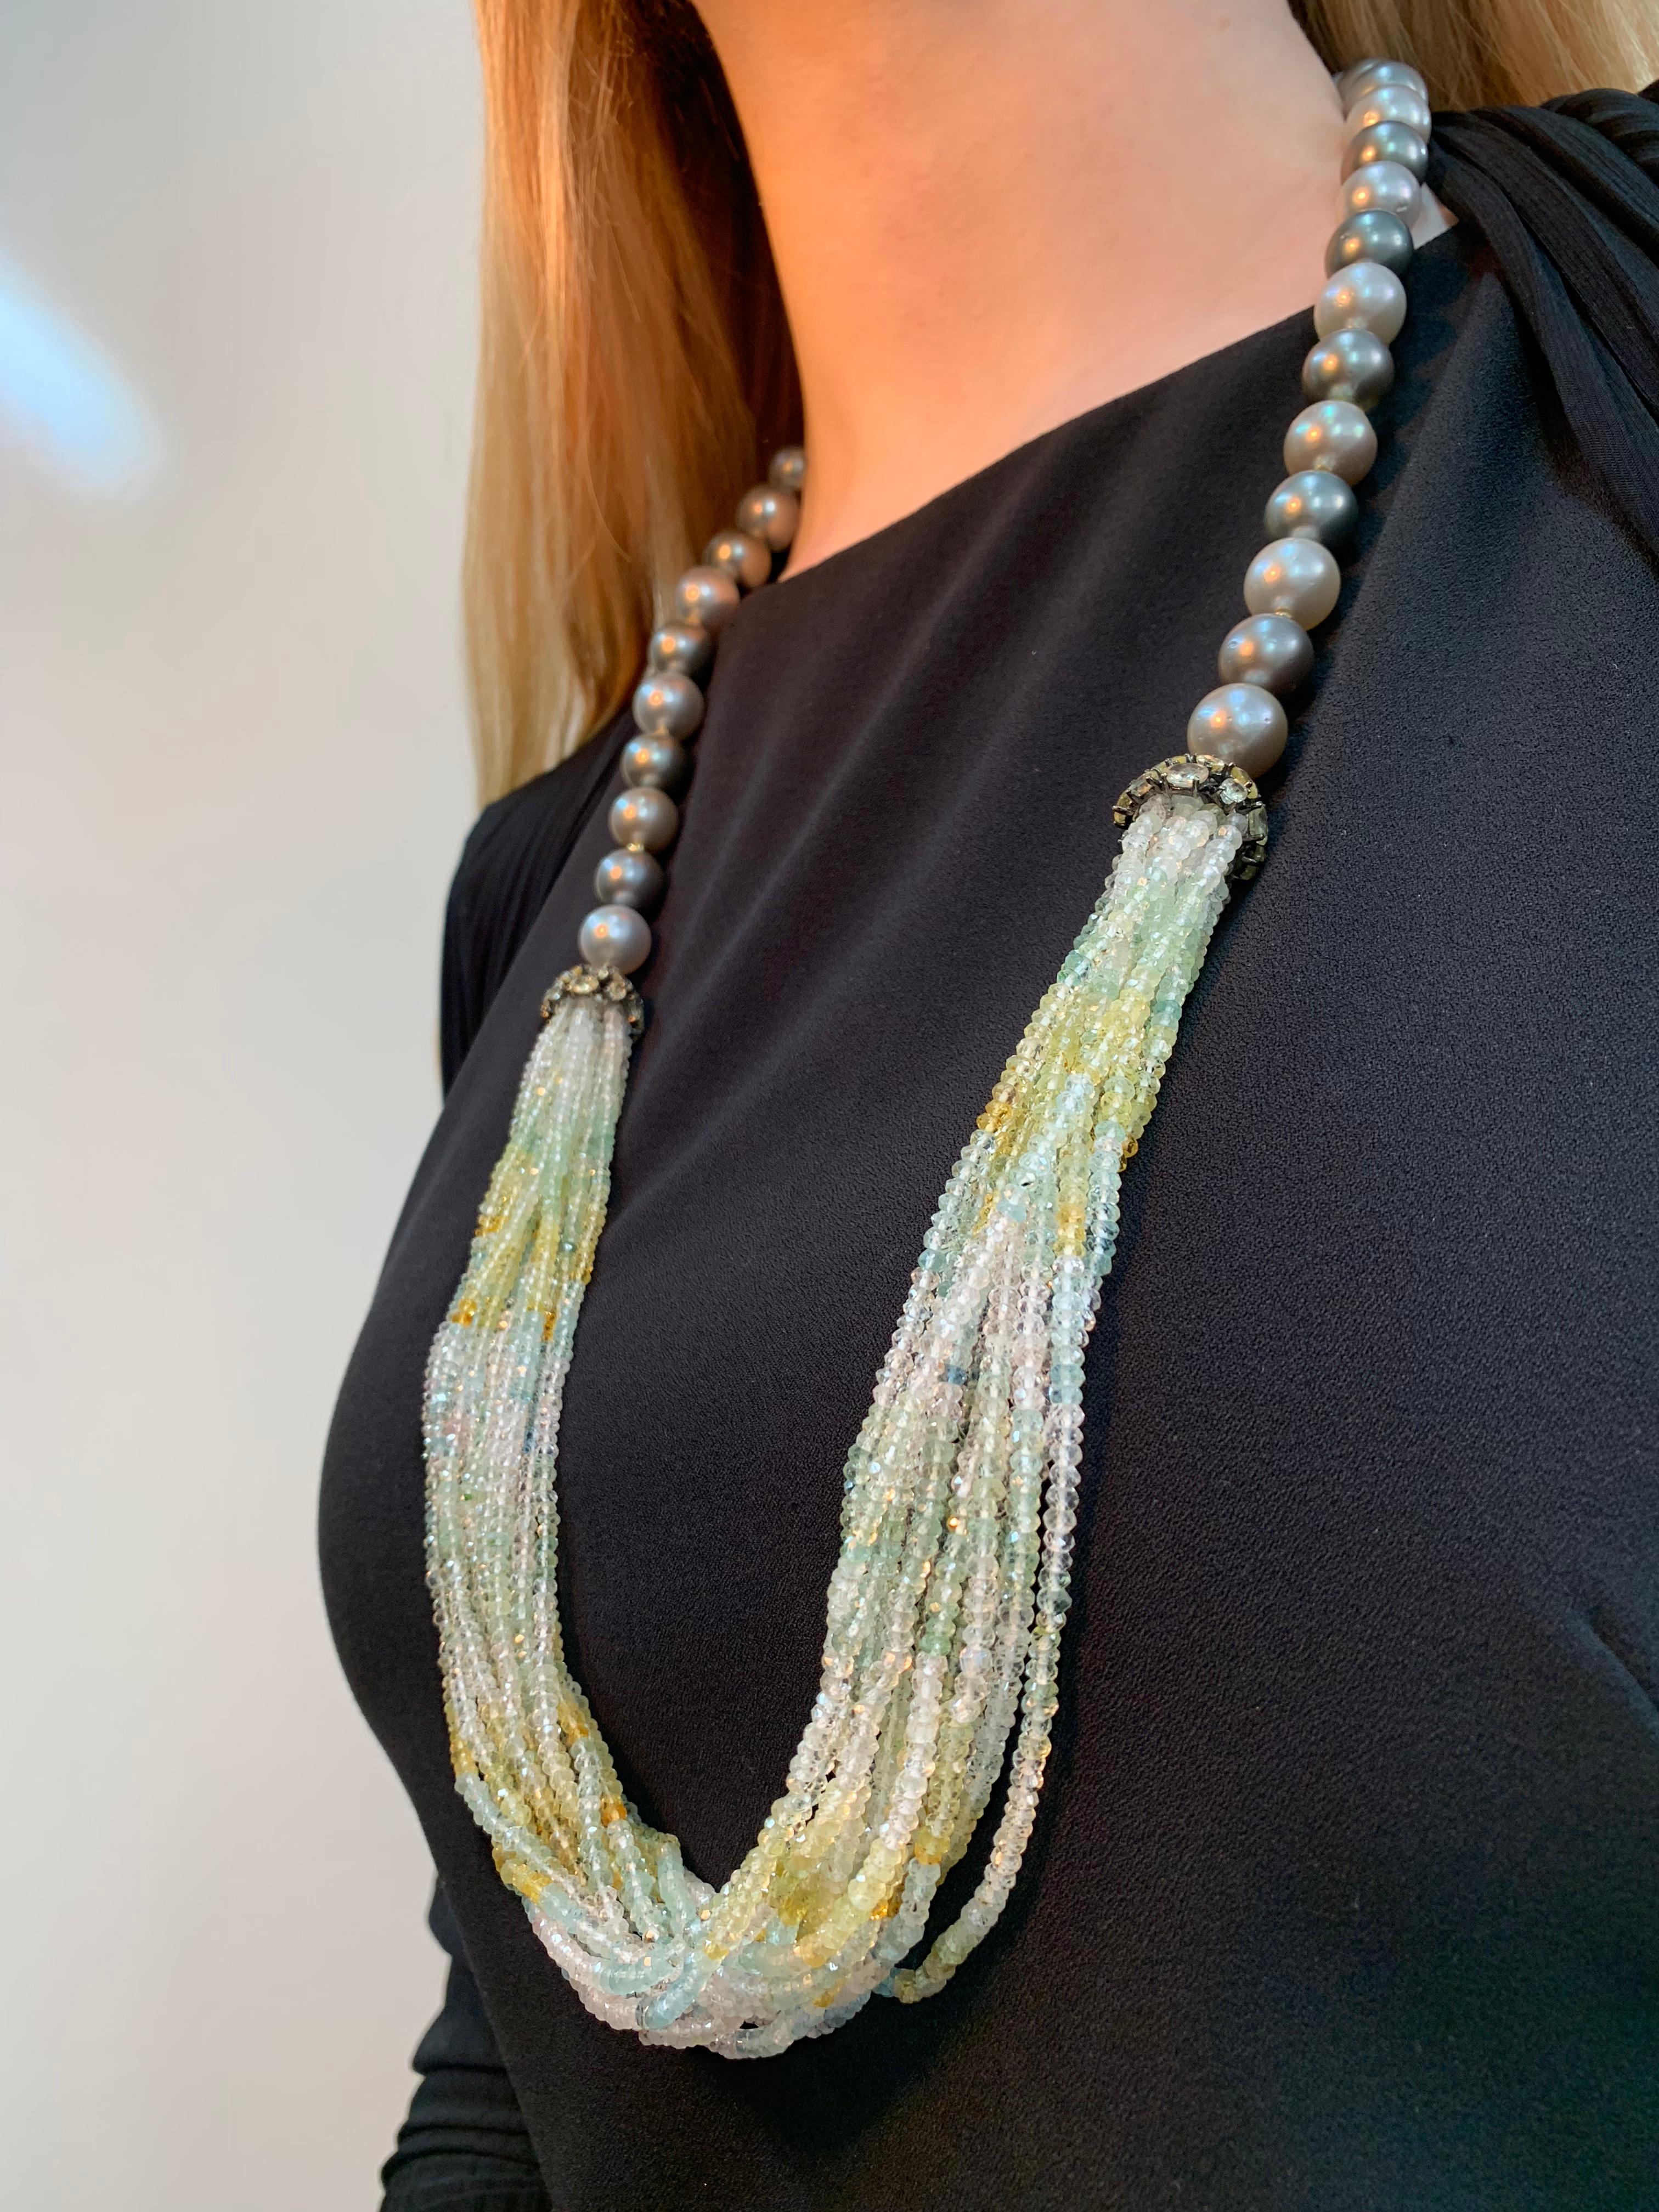 The mesmerising necklace by Yoko London features a splendid blend of Tahitian Pearls. The different hues of the Tahitian pearls are perfectly accentuated by the vibrant colours of the multiple gemstones that are featured in the necklace, which